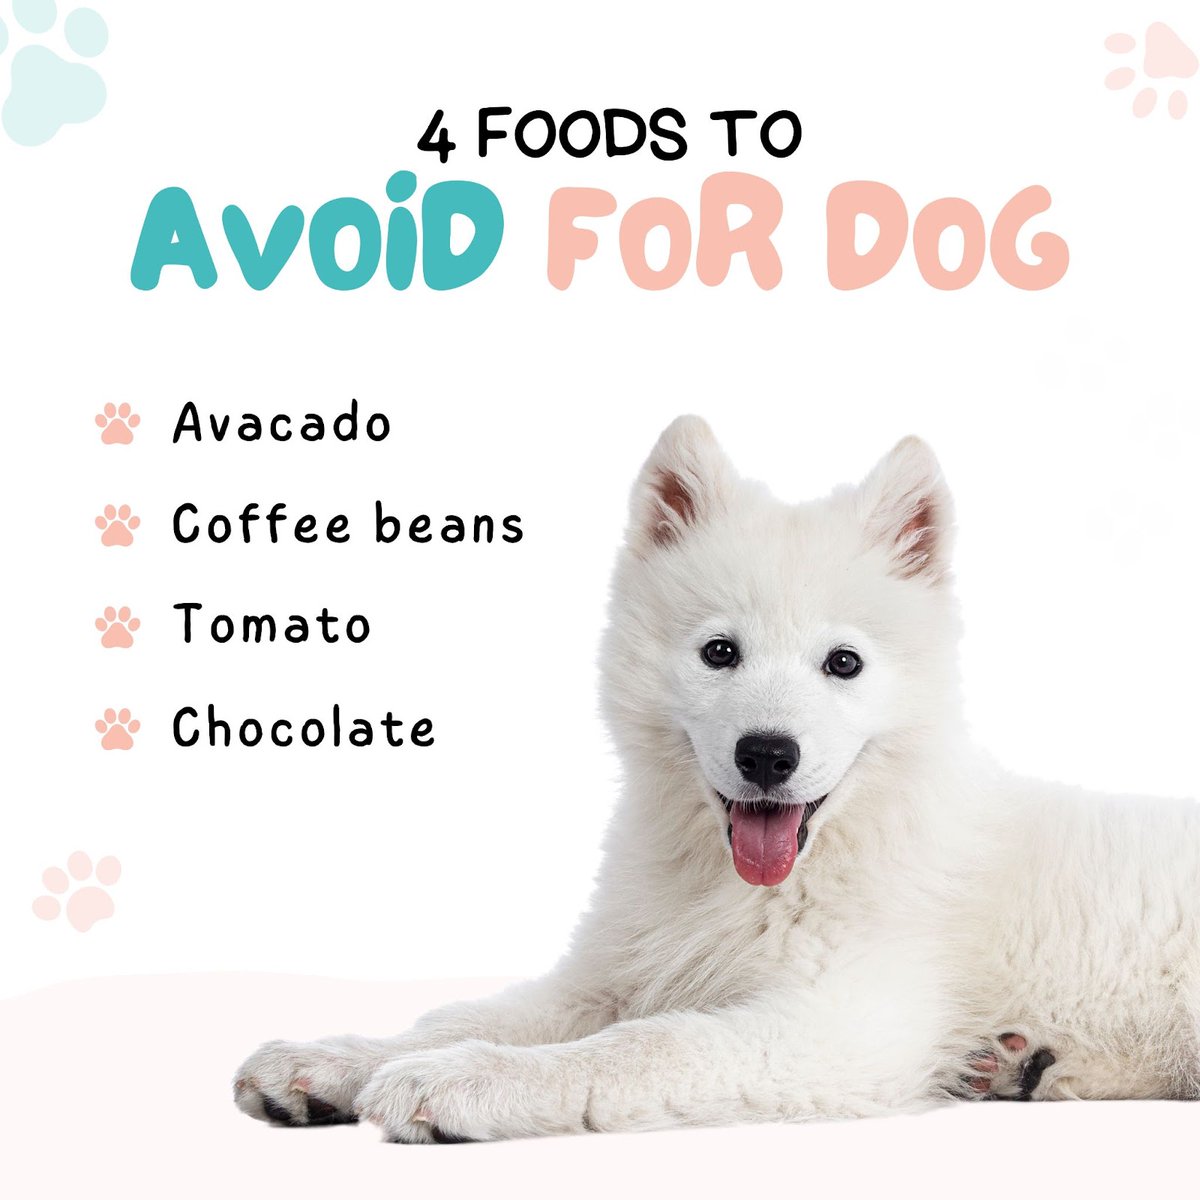 Watch out! Not all foods are safe for your furry friend. 🚫
These are some common foods to avoid feeding your dog and keep them healthy and happy. 
------
🌐 purrfectshoppe.com
.
#dogtreats #healthysnacks #dogcaretips #petwellness #dogtraining #dogbehavior #specialtreats